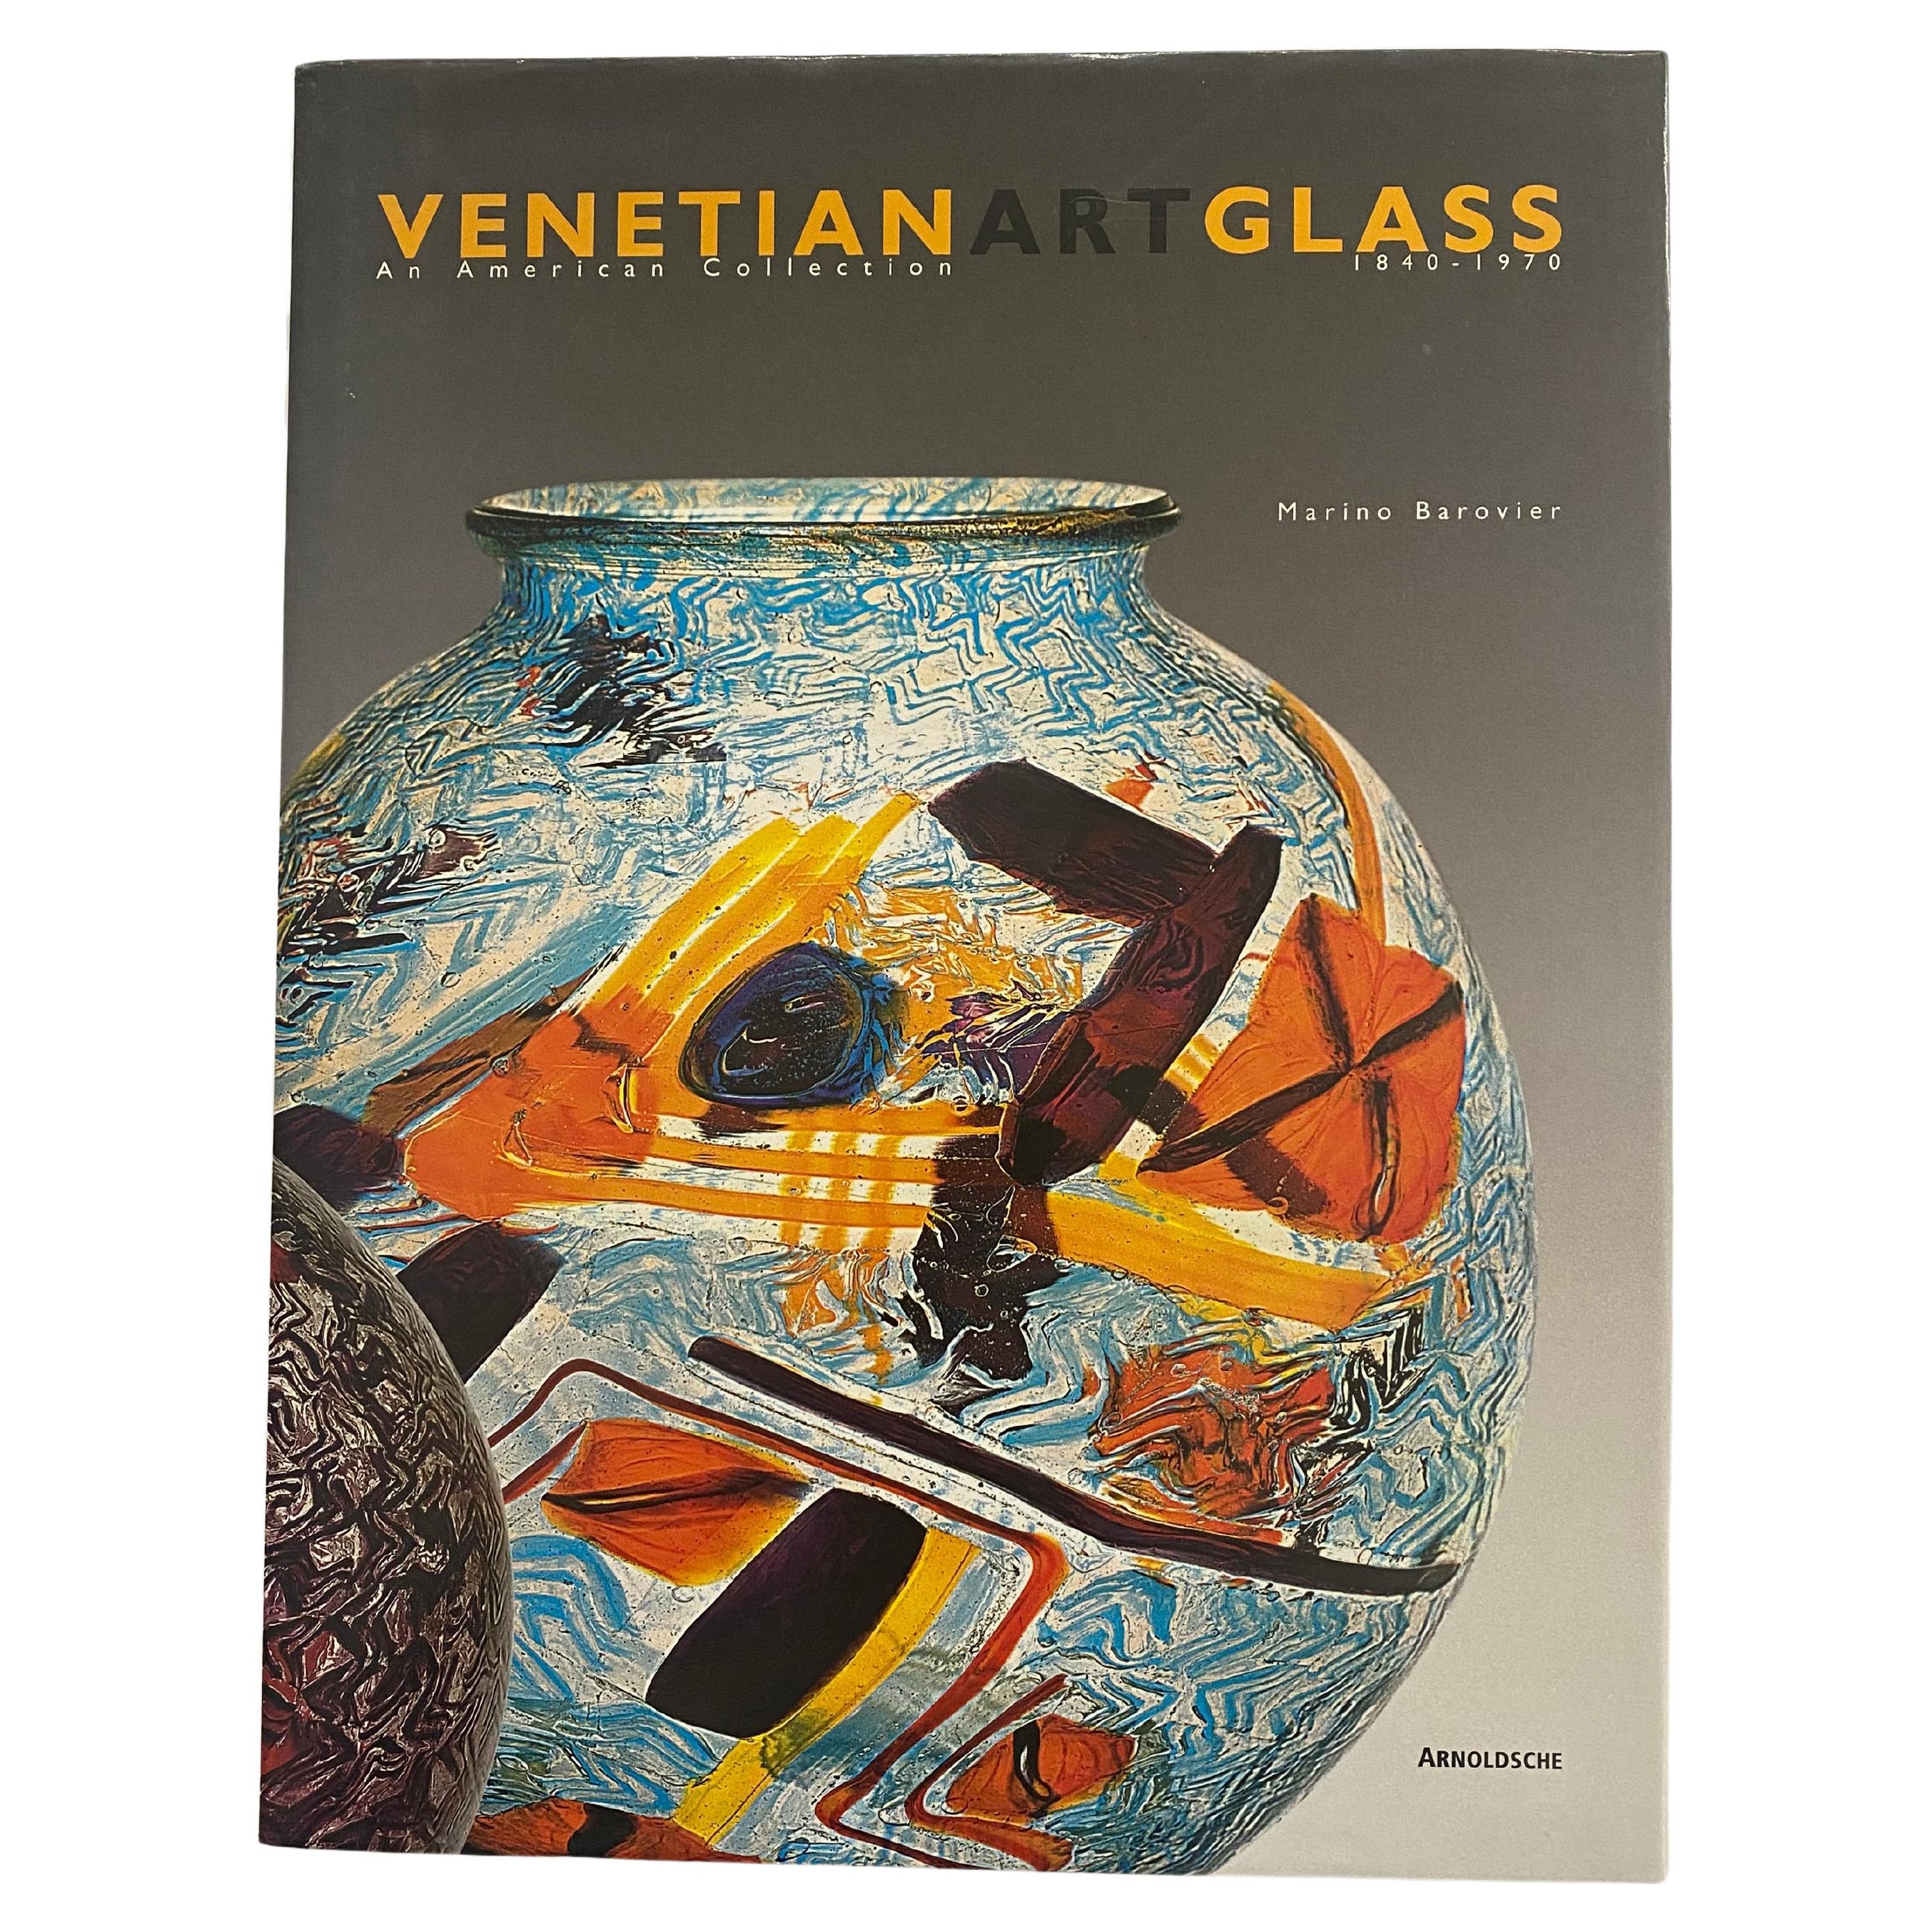 Venetian Art Glass: An American Collection 1840- 1970 by Marino Barovier (Book) For Sale